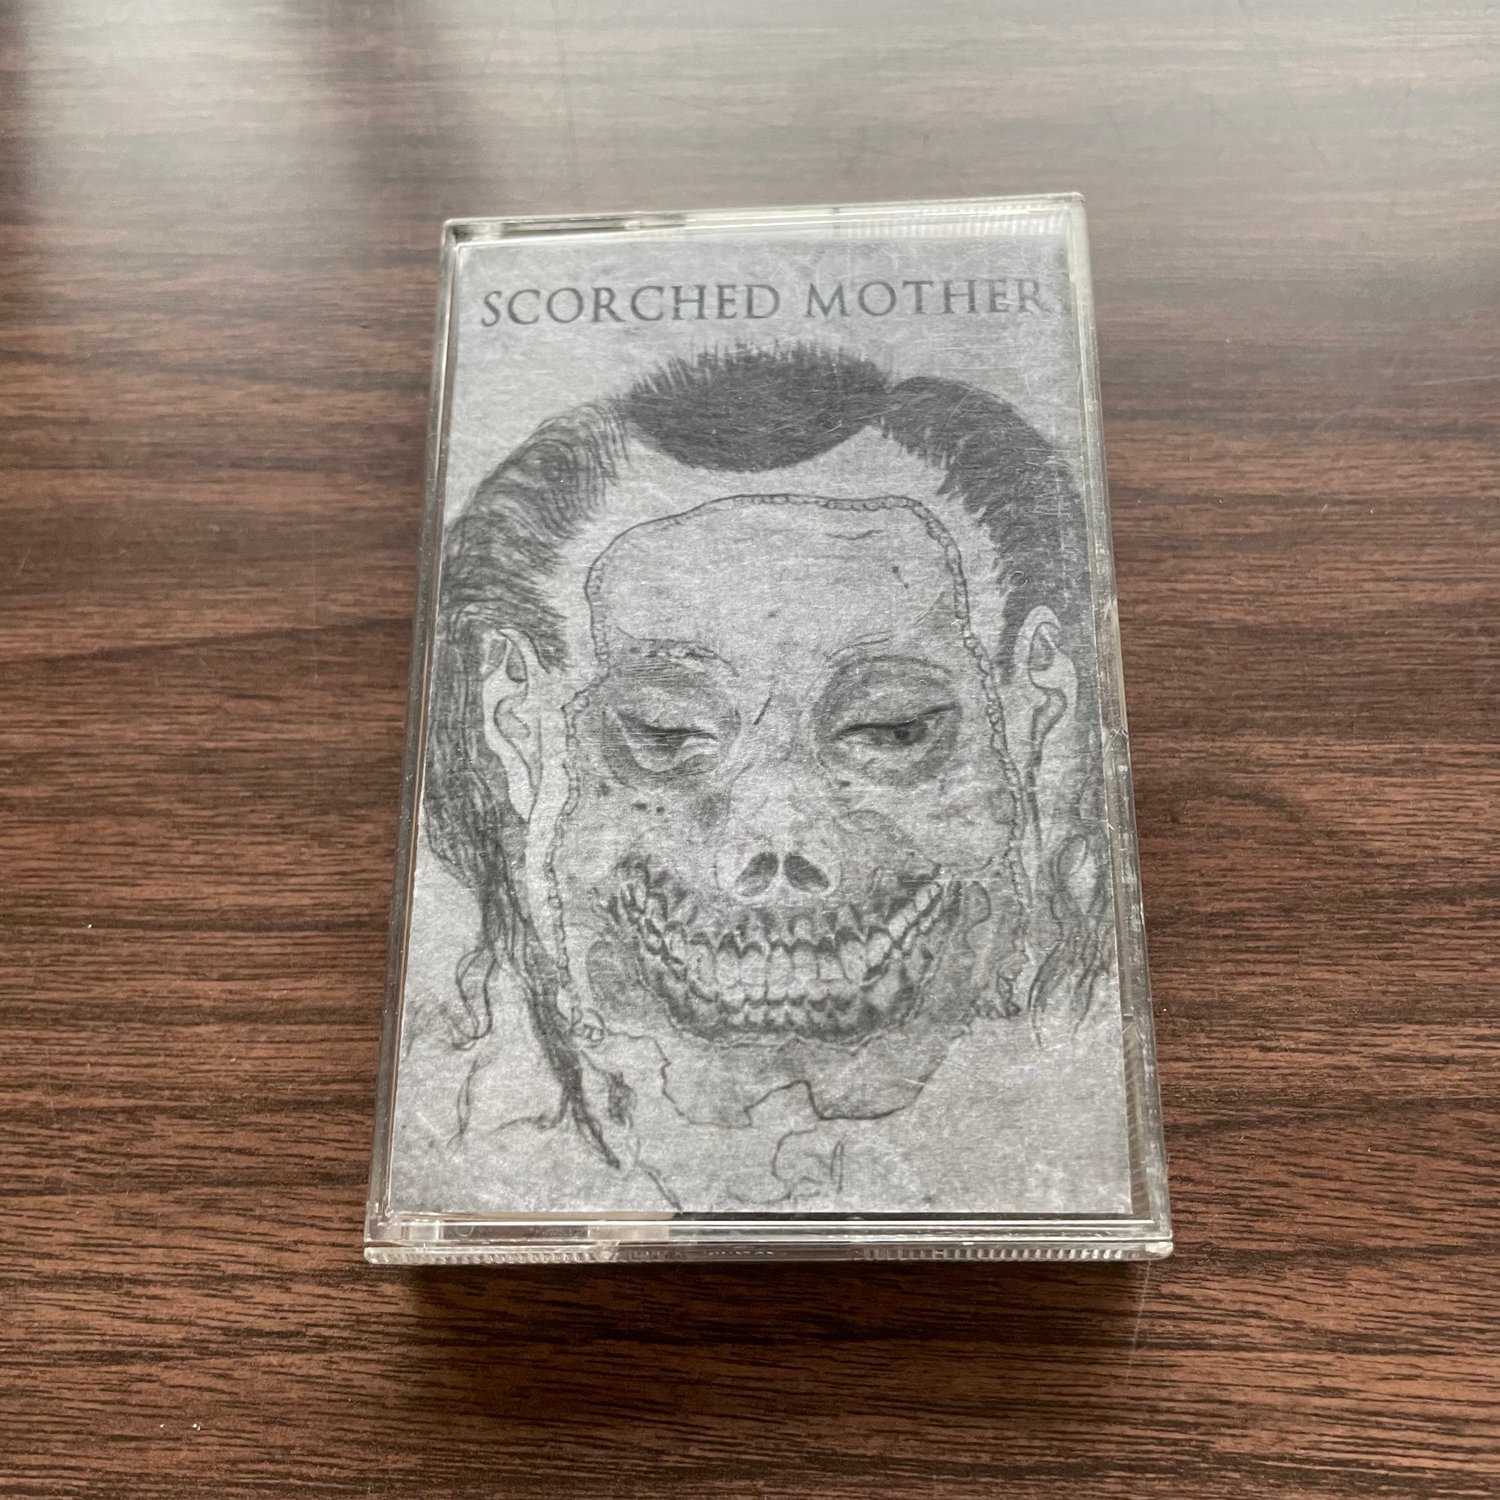 Circuitrip/White Widow split - Scorched Mother (cs)